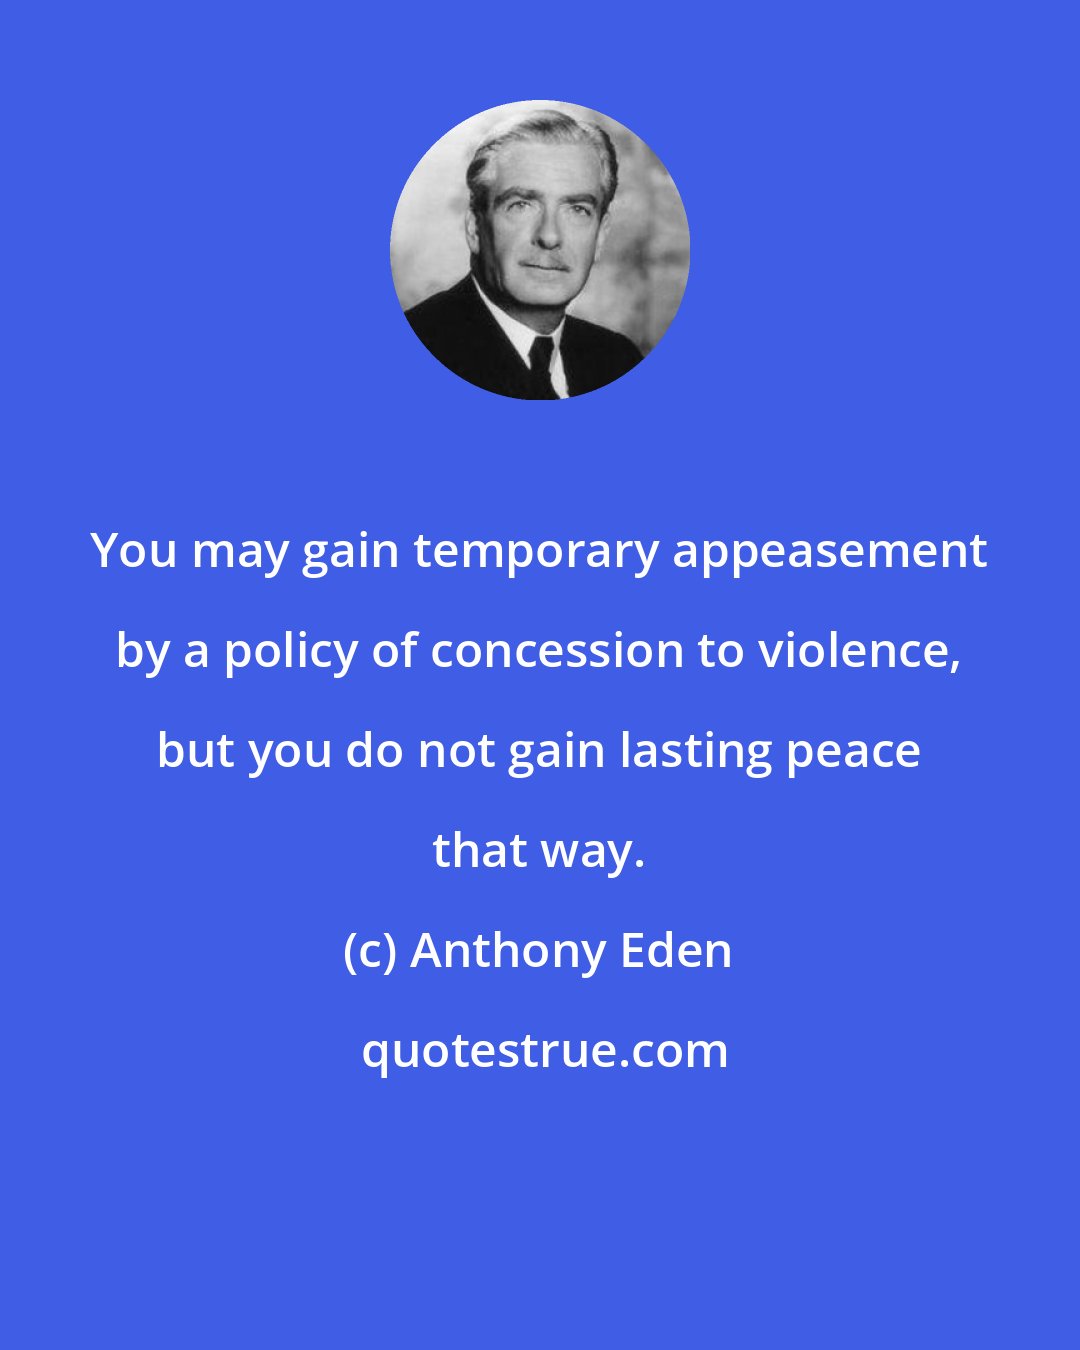 Anthony Eden: You may gain temporary appeasement by a policy of concession to violence, but you do not gain lasting peace that way.